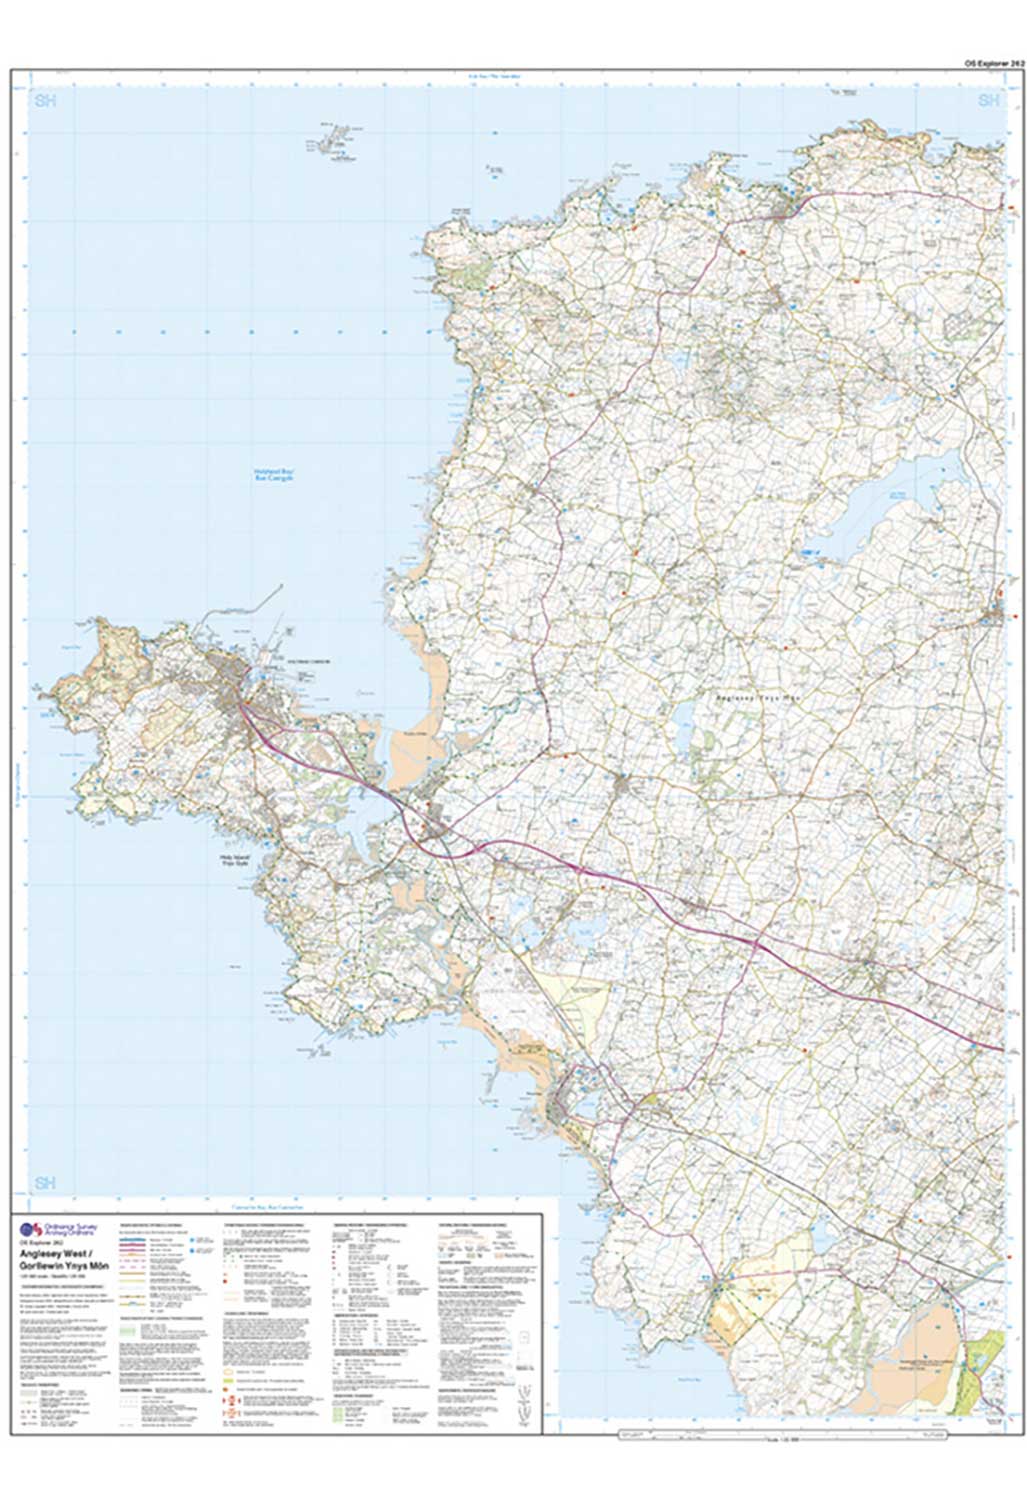 Ordnance Survey Anglesey West - OS Explorer 262 Map